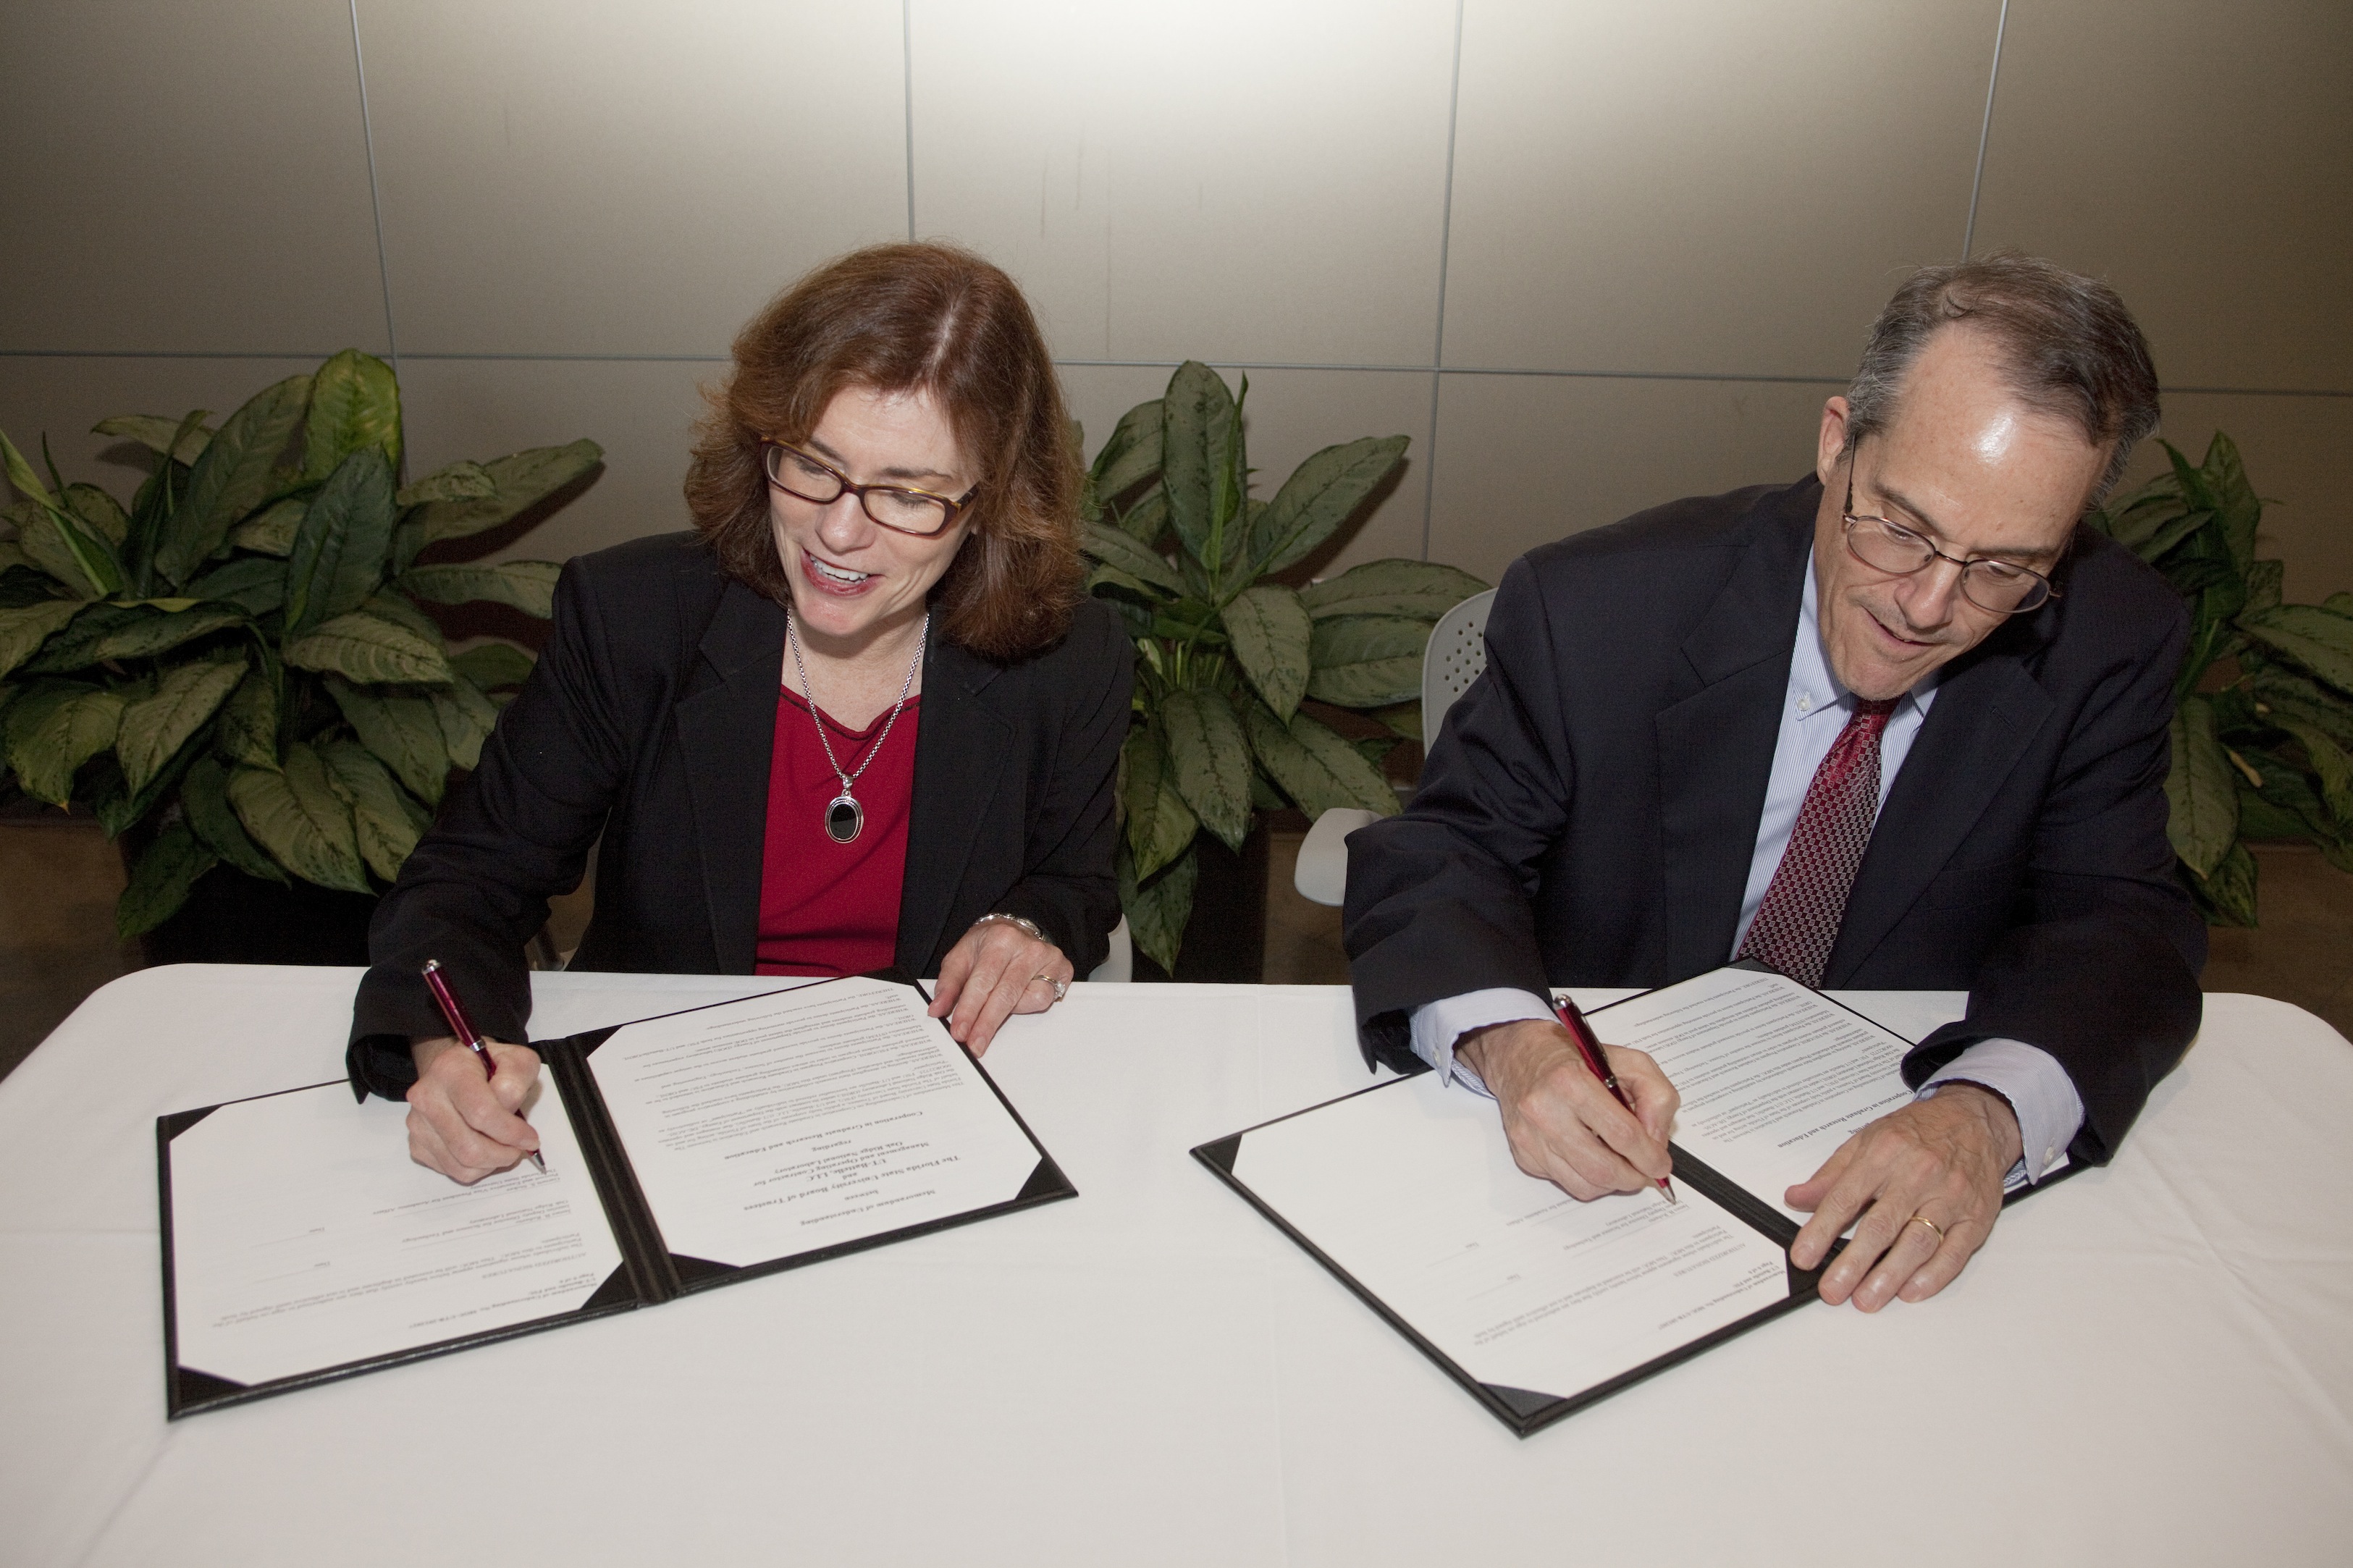 Florida State University Provost and Executive Vice President for Academic Affairs Garnett Stokes, left, and James Roberto, Oak Ridge National Laboratory’s associate laboratory director for Science and Technology Partnerships, sign a memorandum of understanding between the two organizations.